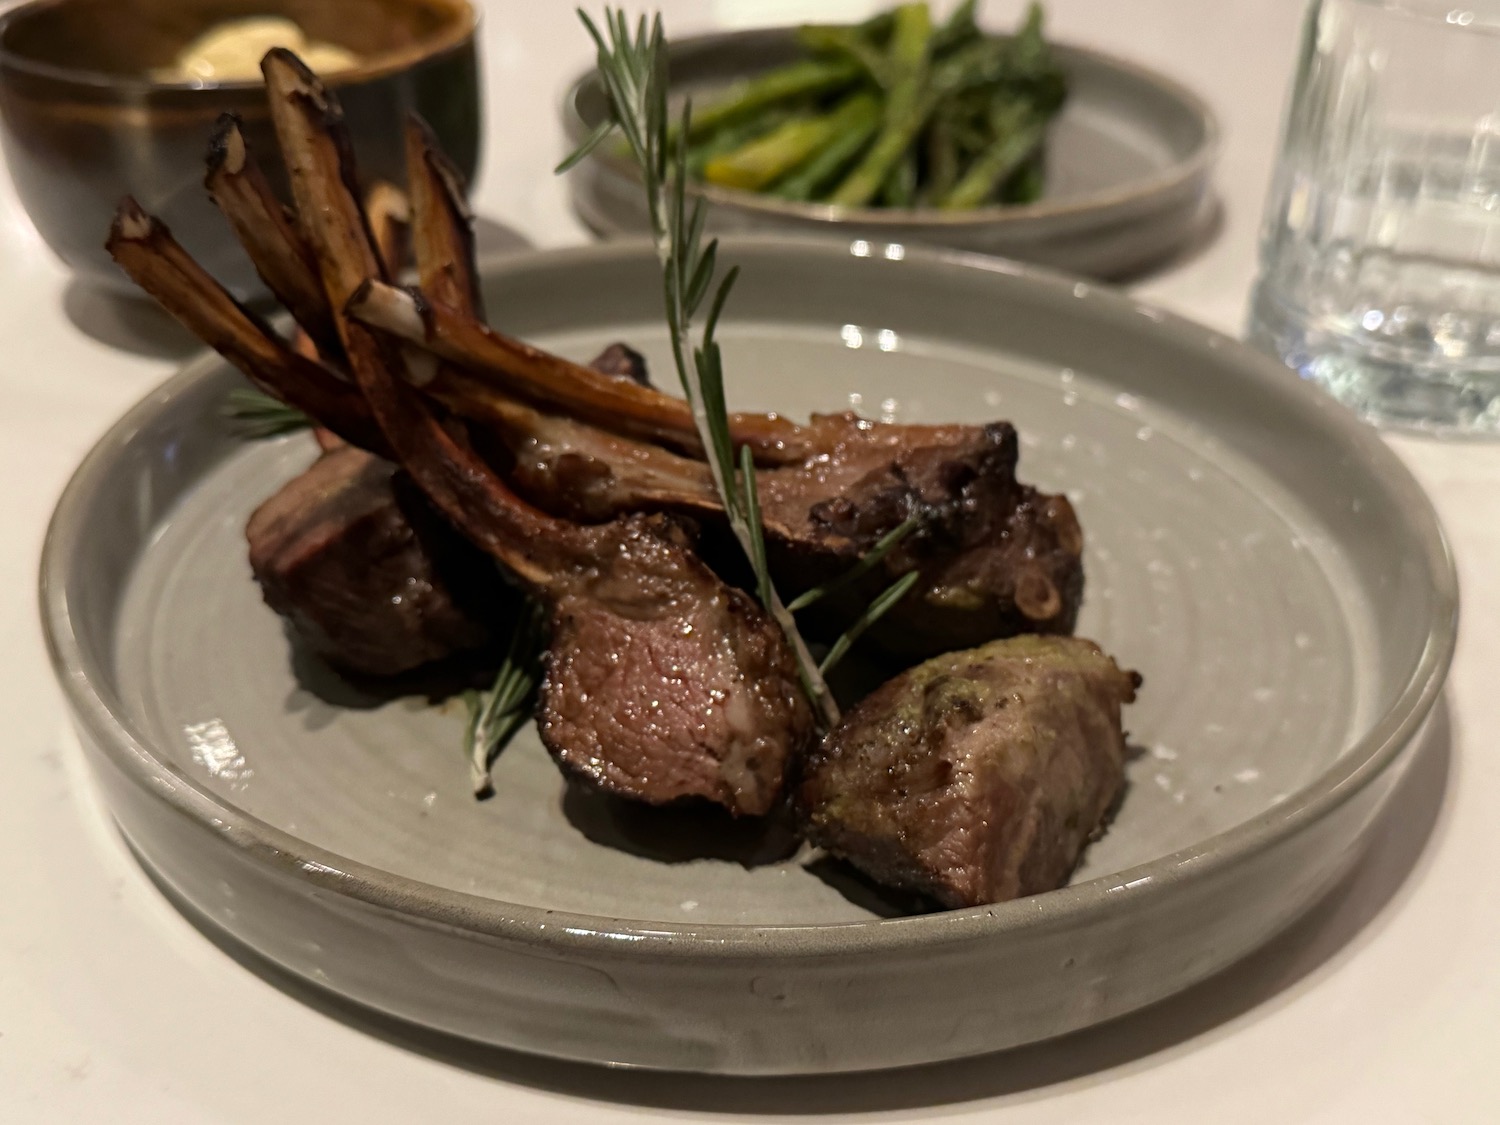 a plate of meat with a rosemary sprig on it